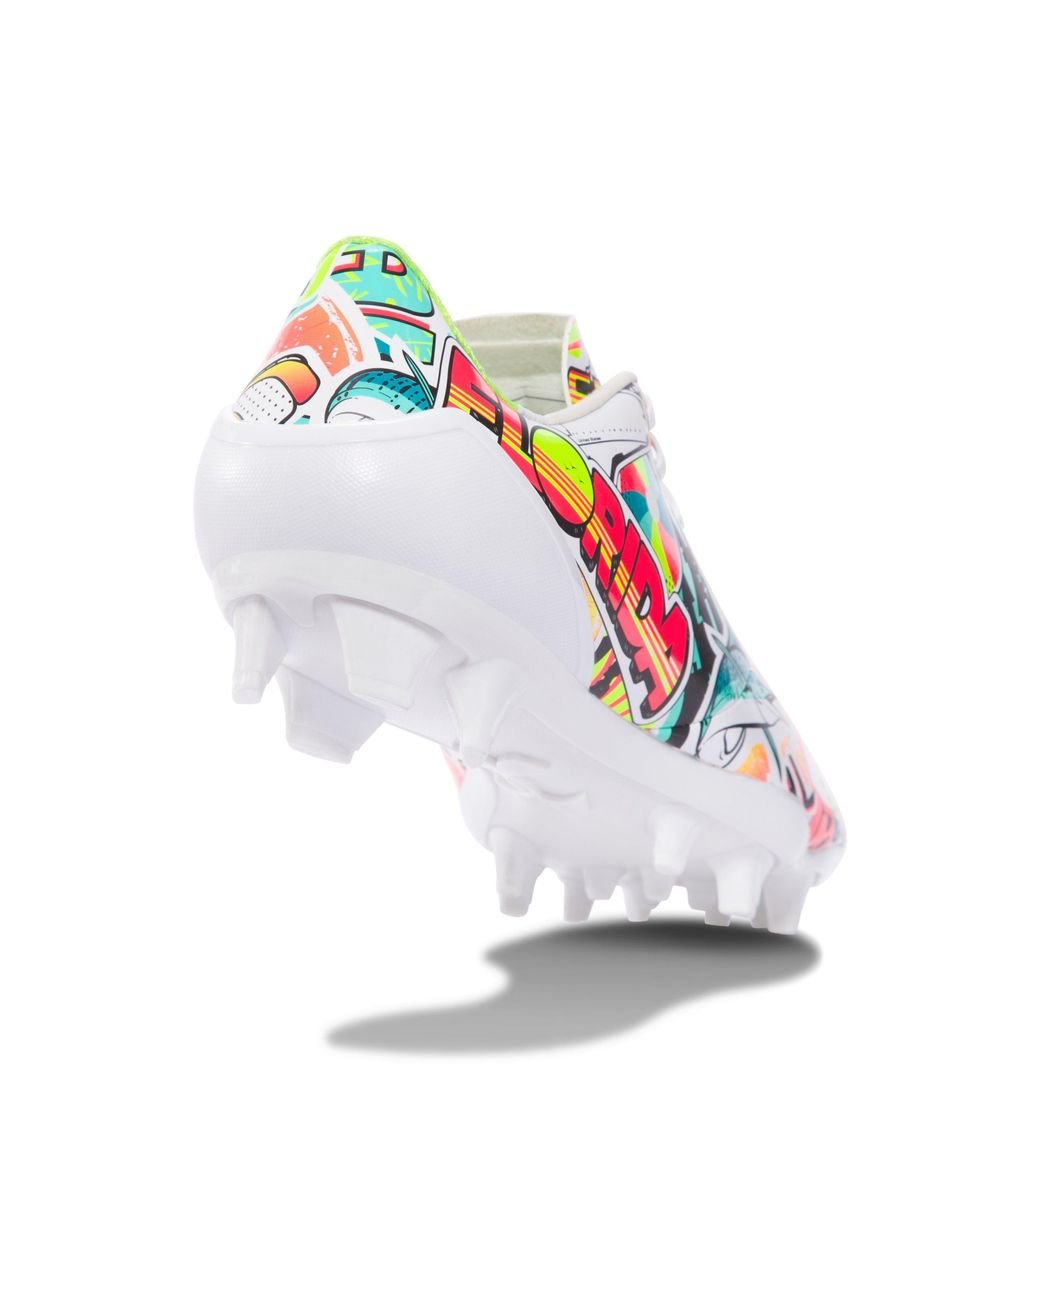 Under Armour Men's Ua Spotlight – Limited Edition Football Cleats for Men |  Lyst